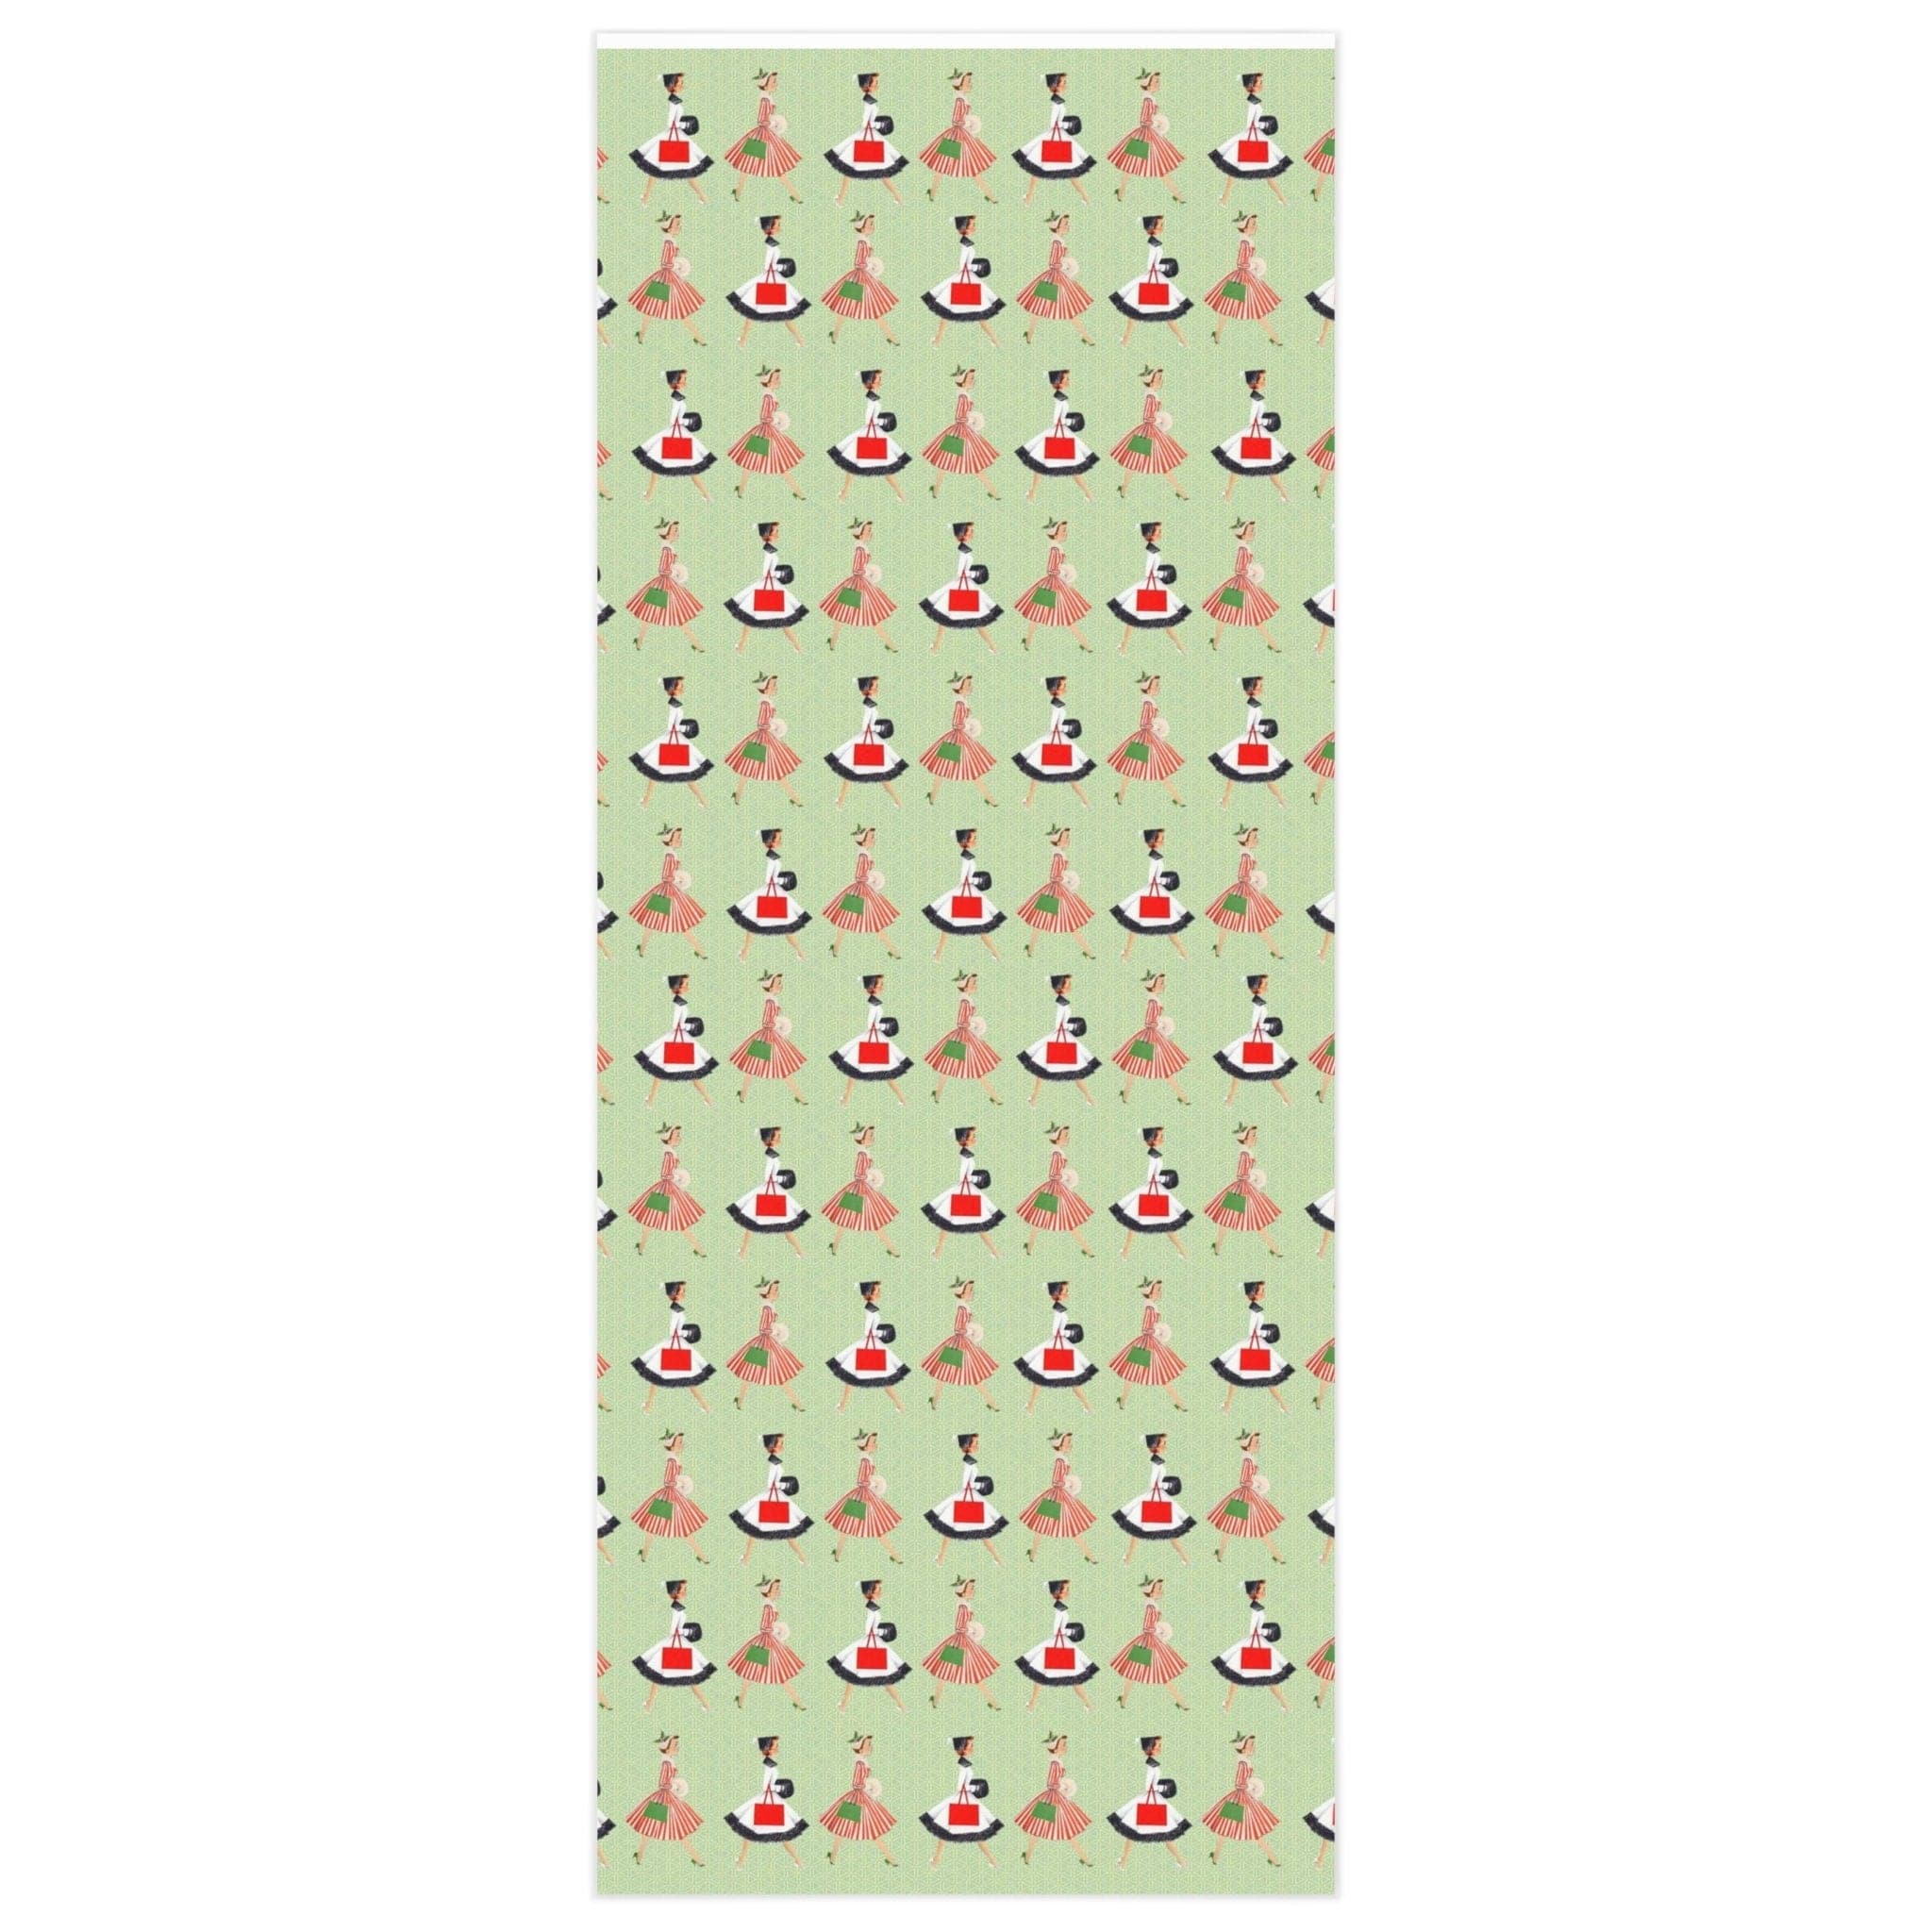 Kate McEnroe New York 50s Vintage Women in Christmas Setting Wrapping Paper, Mid Century Modern Retro Green, Red, Ladies, Housewives Holiday Gift Wrap - 130882623 Wrapping Paper